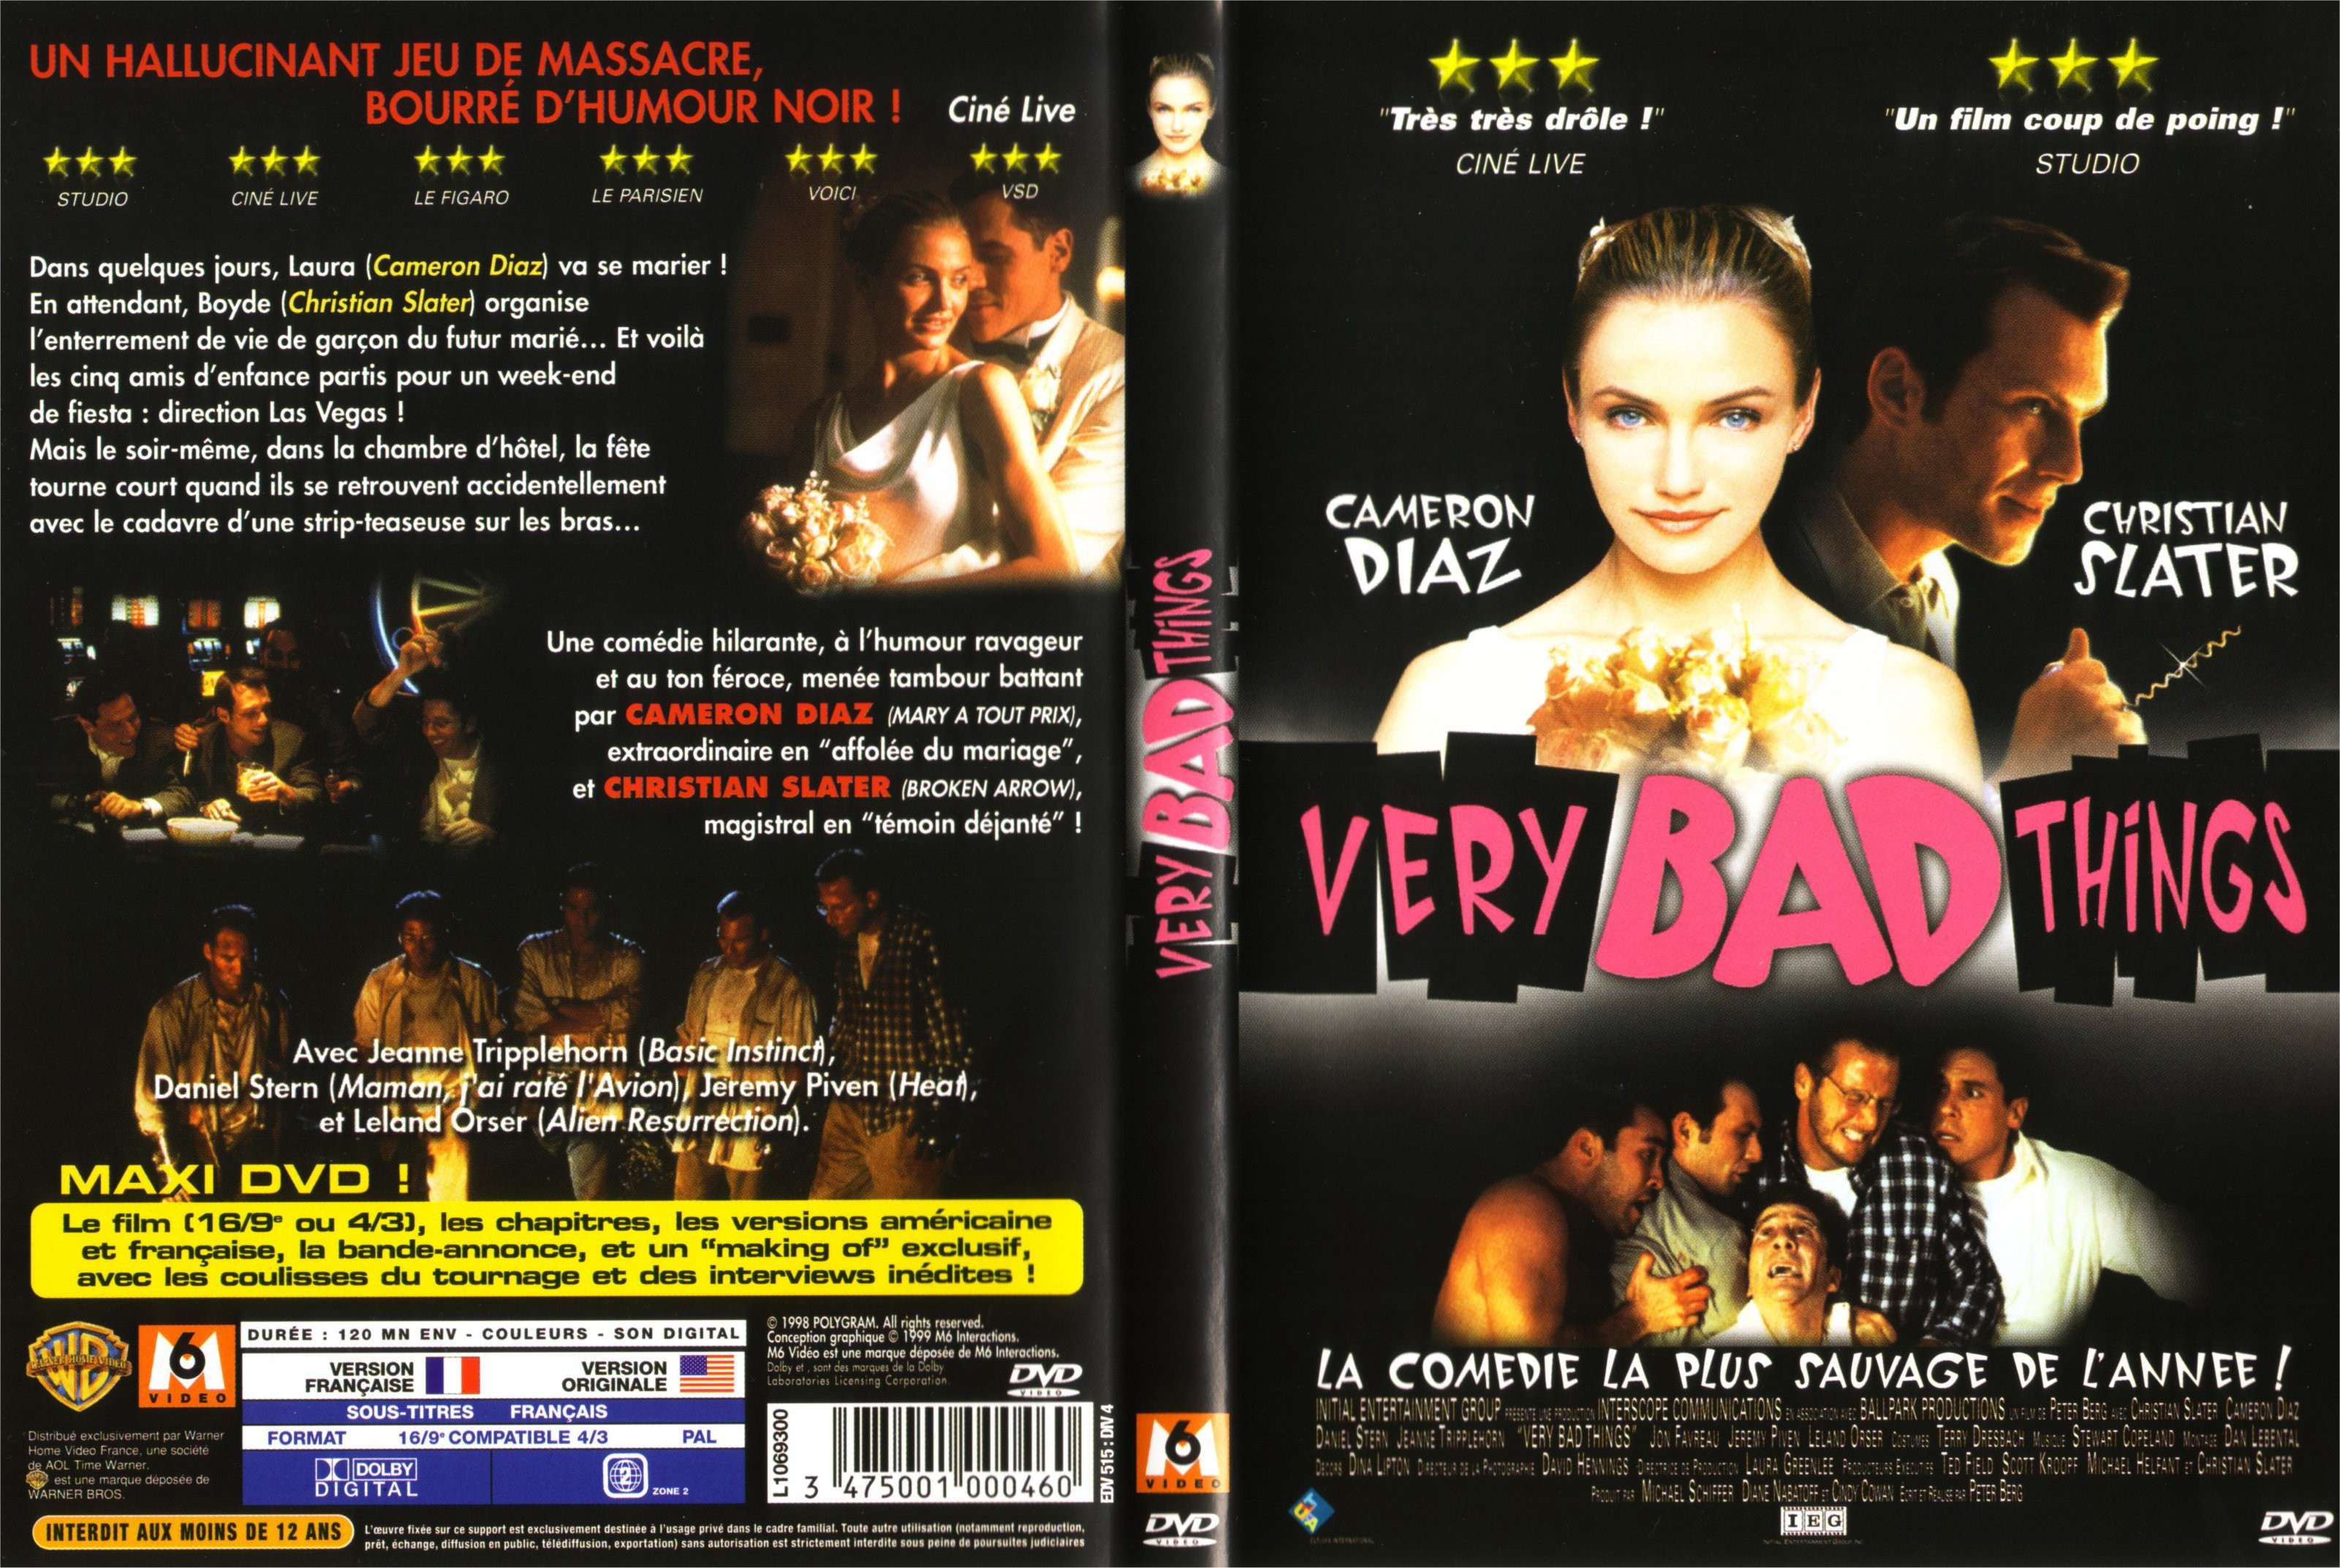 Jaquette DVD Very bad things